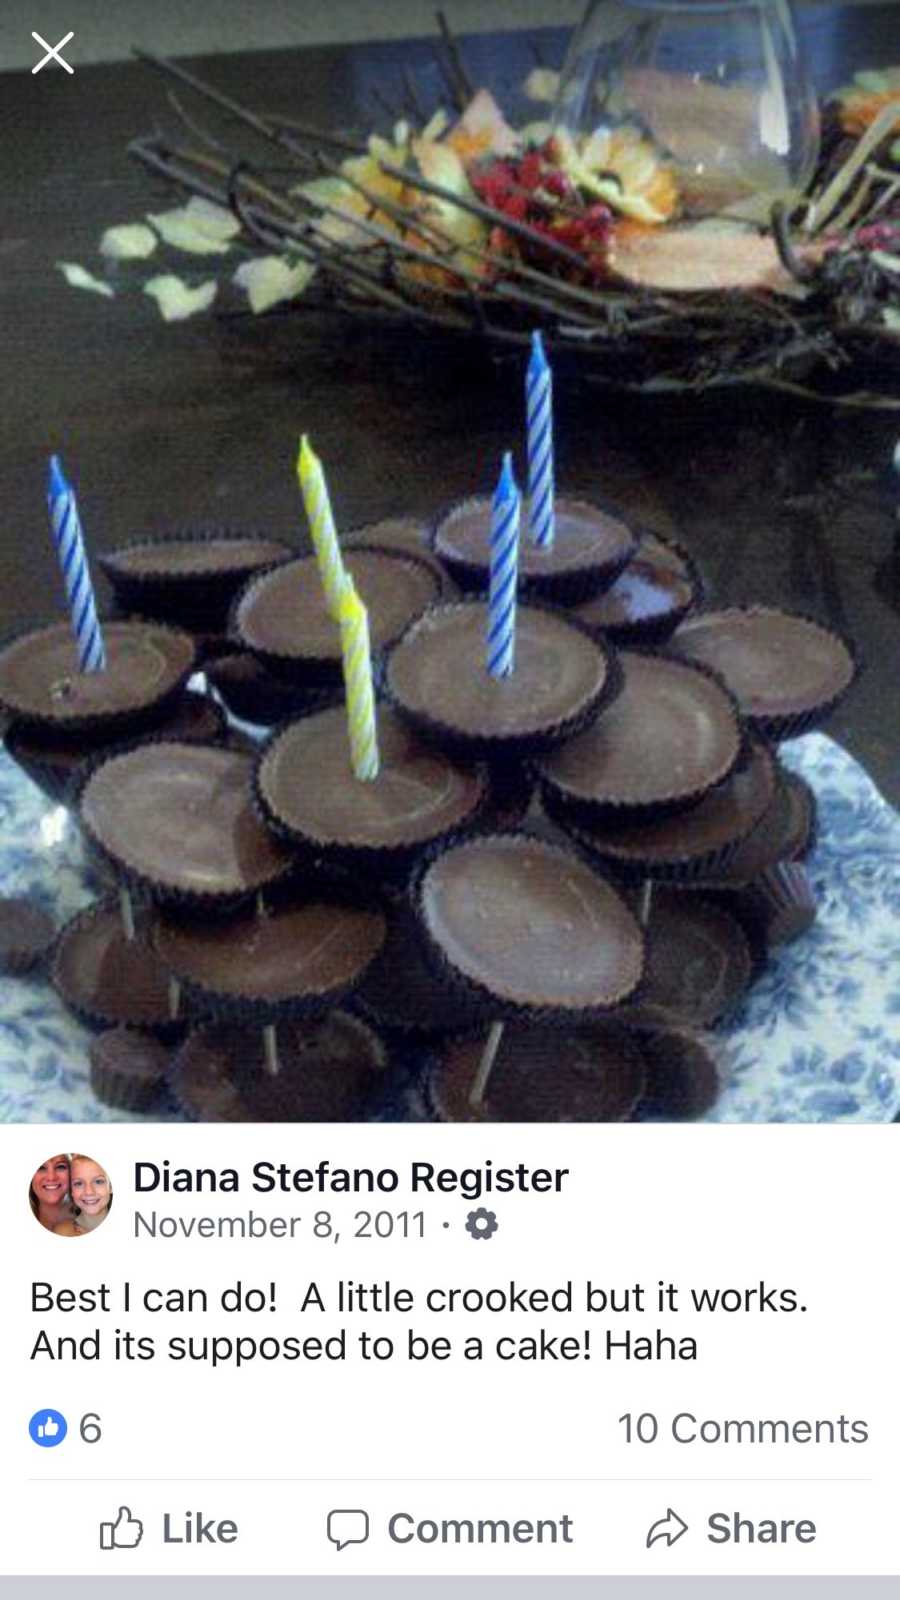 Screenshot of Facebook post of picture that is a pile of Reese's Cups with birthday candles in them